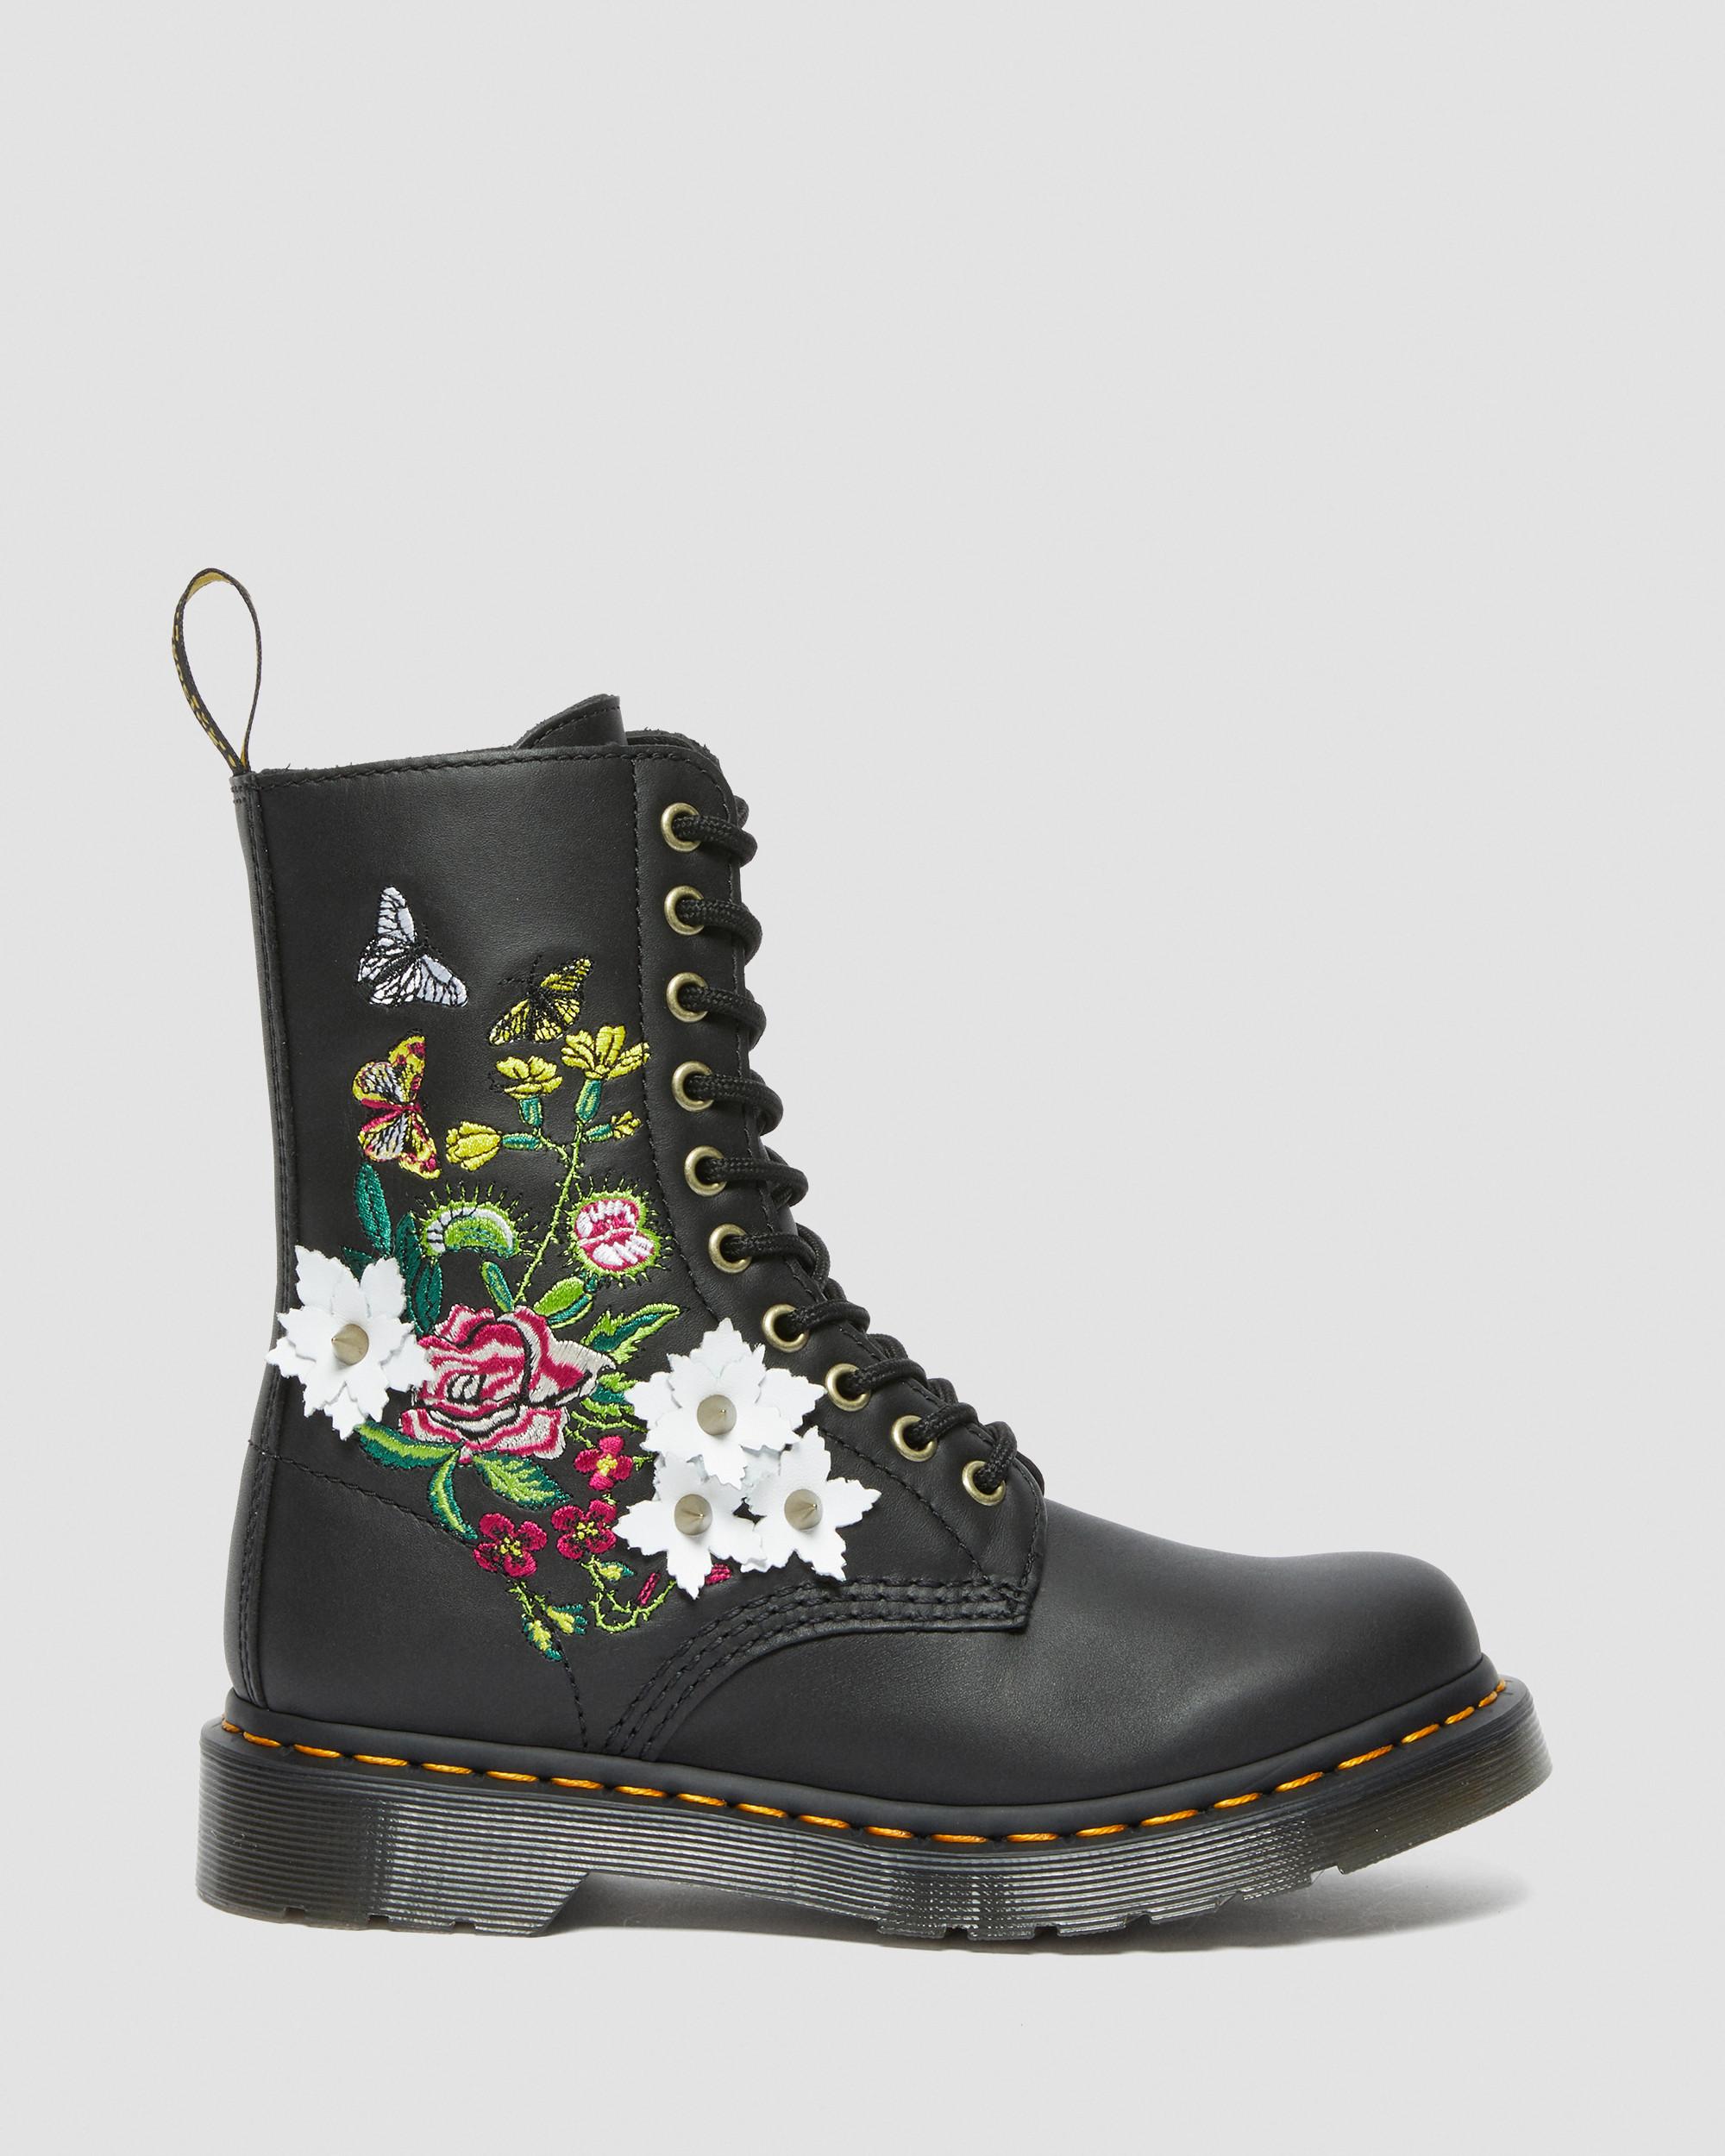 1490 Floral Bloom Leather Mid-Calf Boots | Dr. Martens